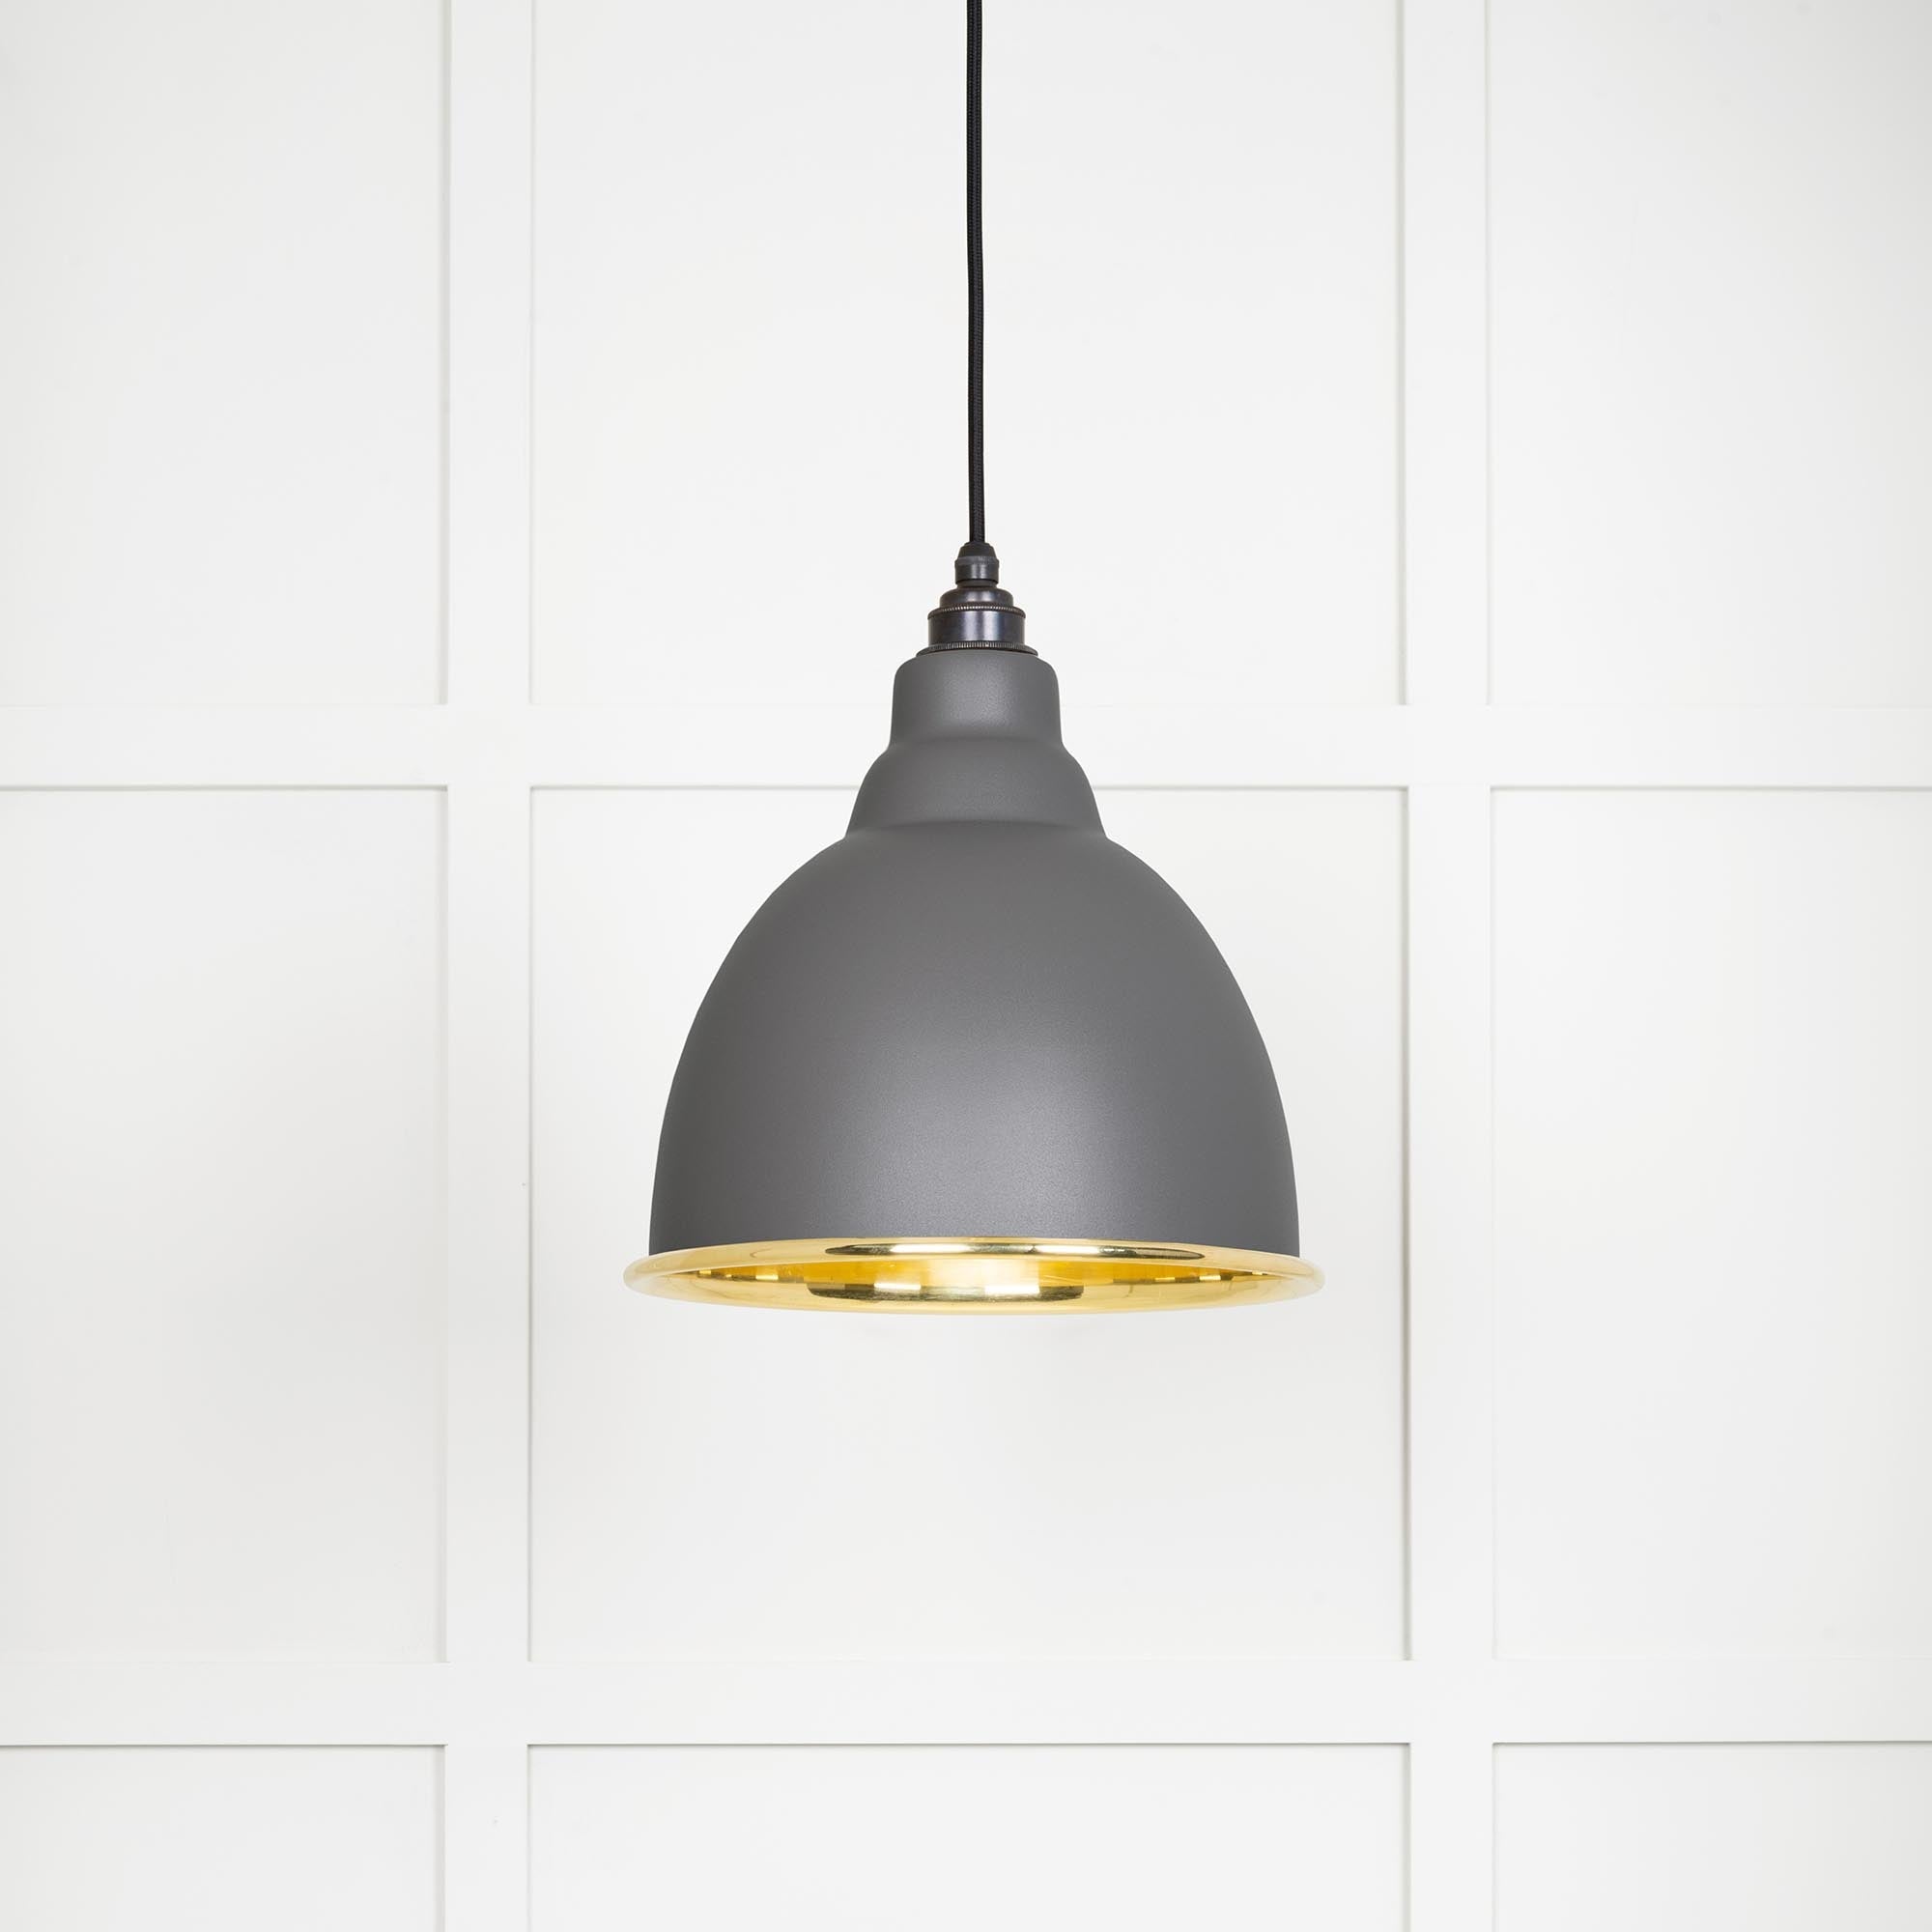 Image of Brindley Ceiling Light in Bluff